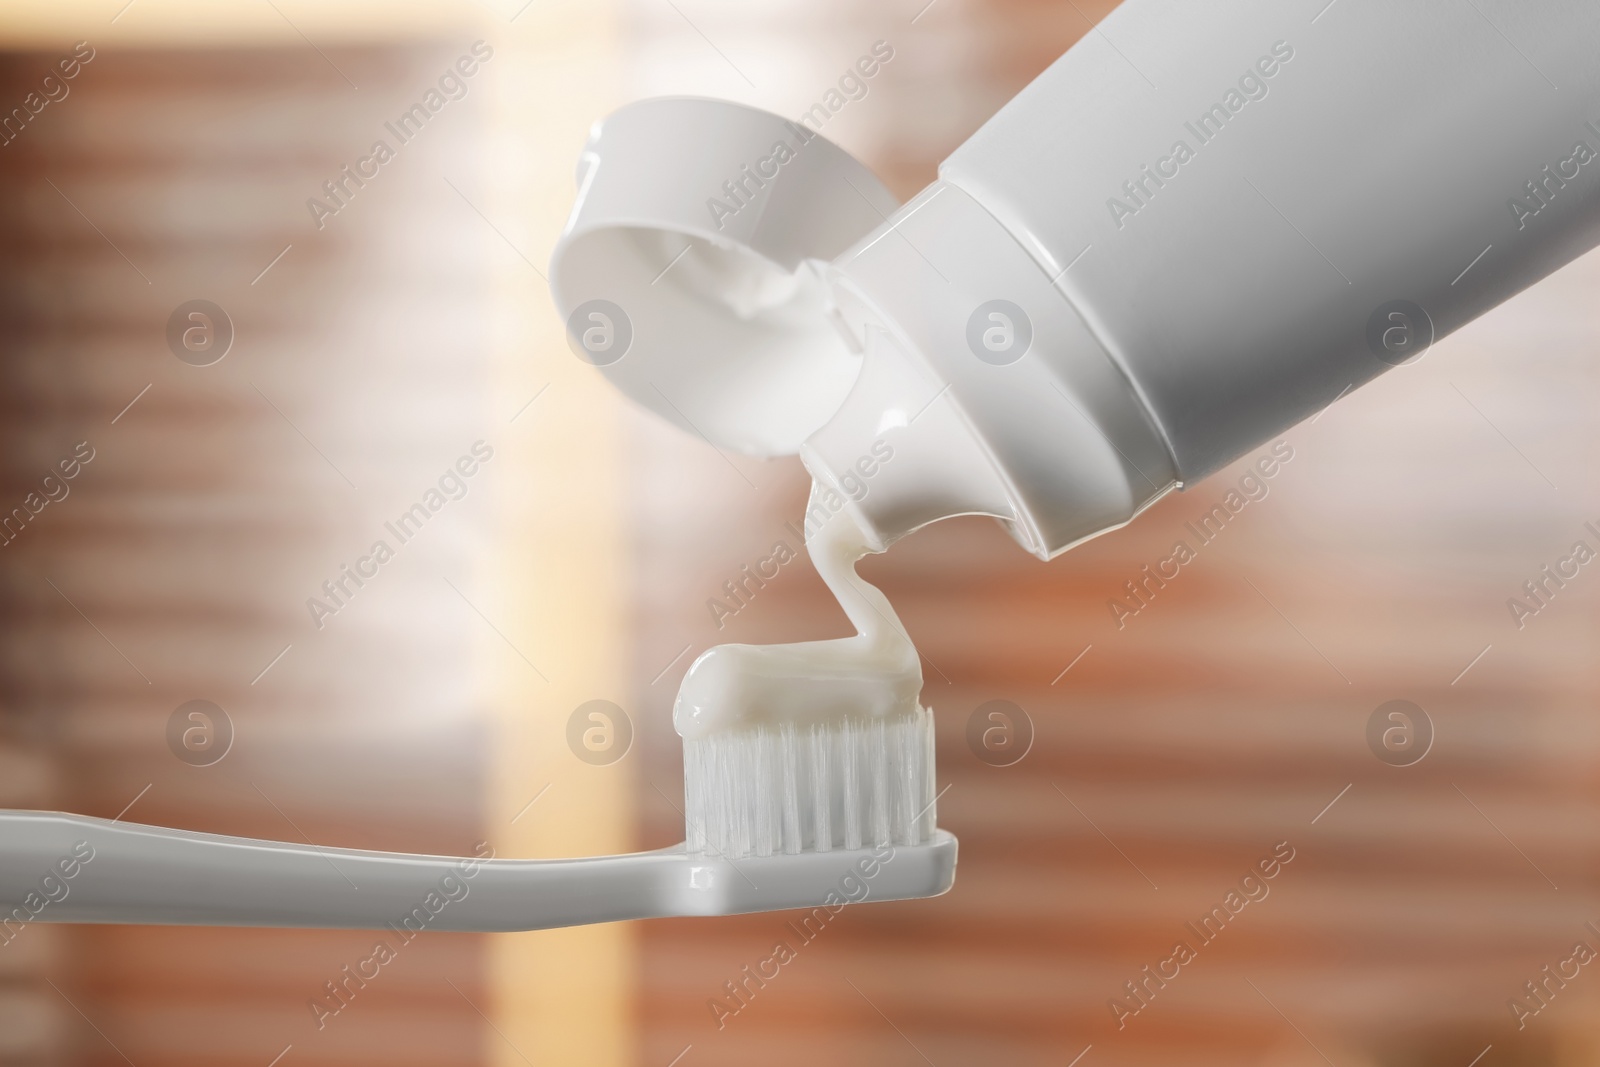 Photo of Applying paste on toothbrush against blurred background, closeup